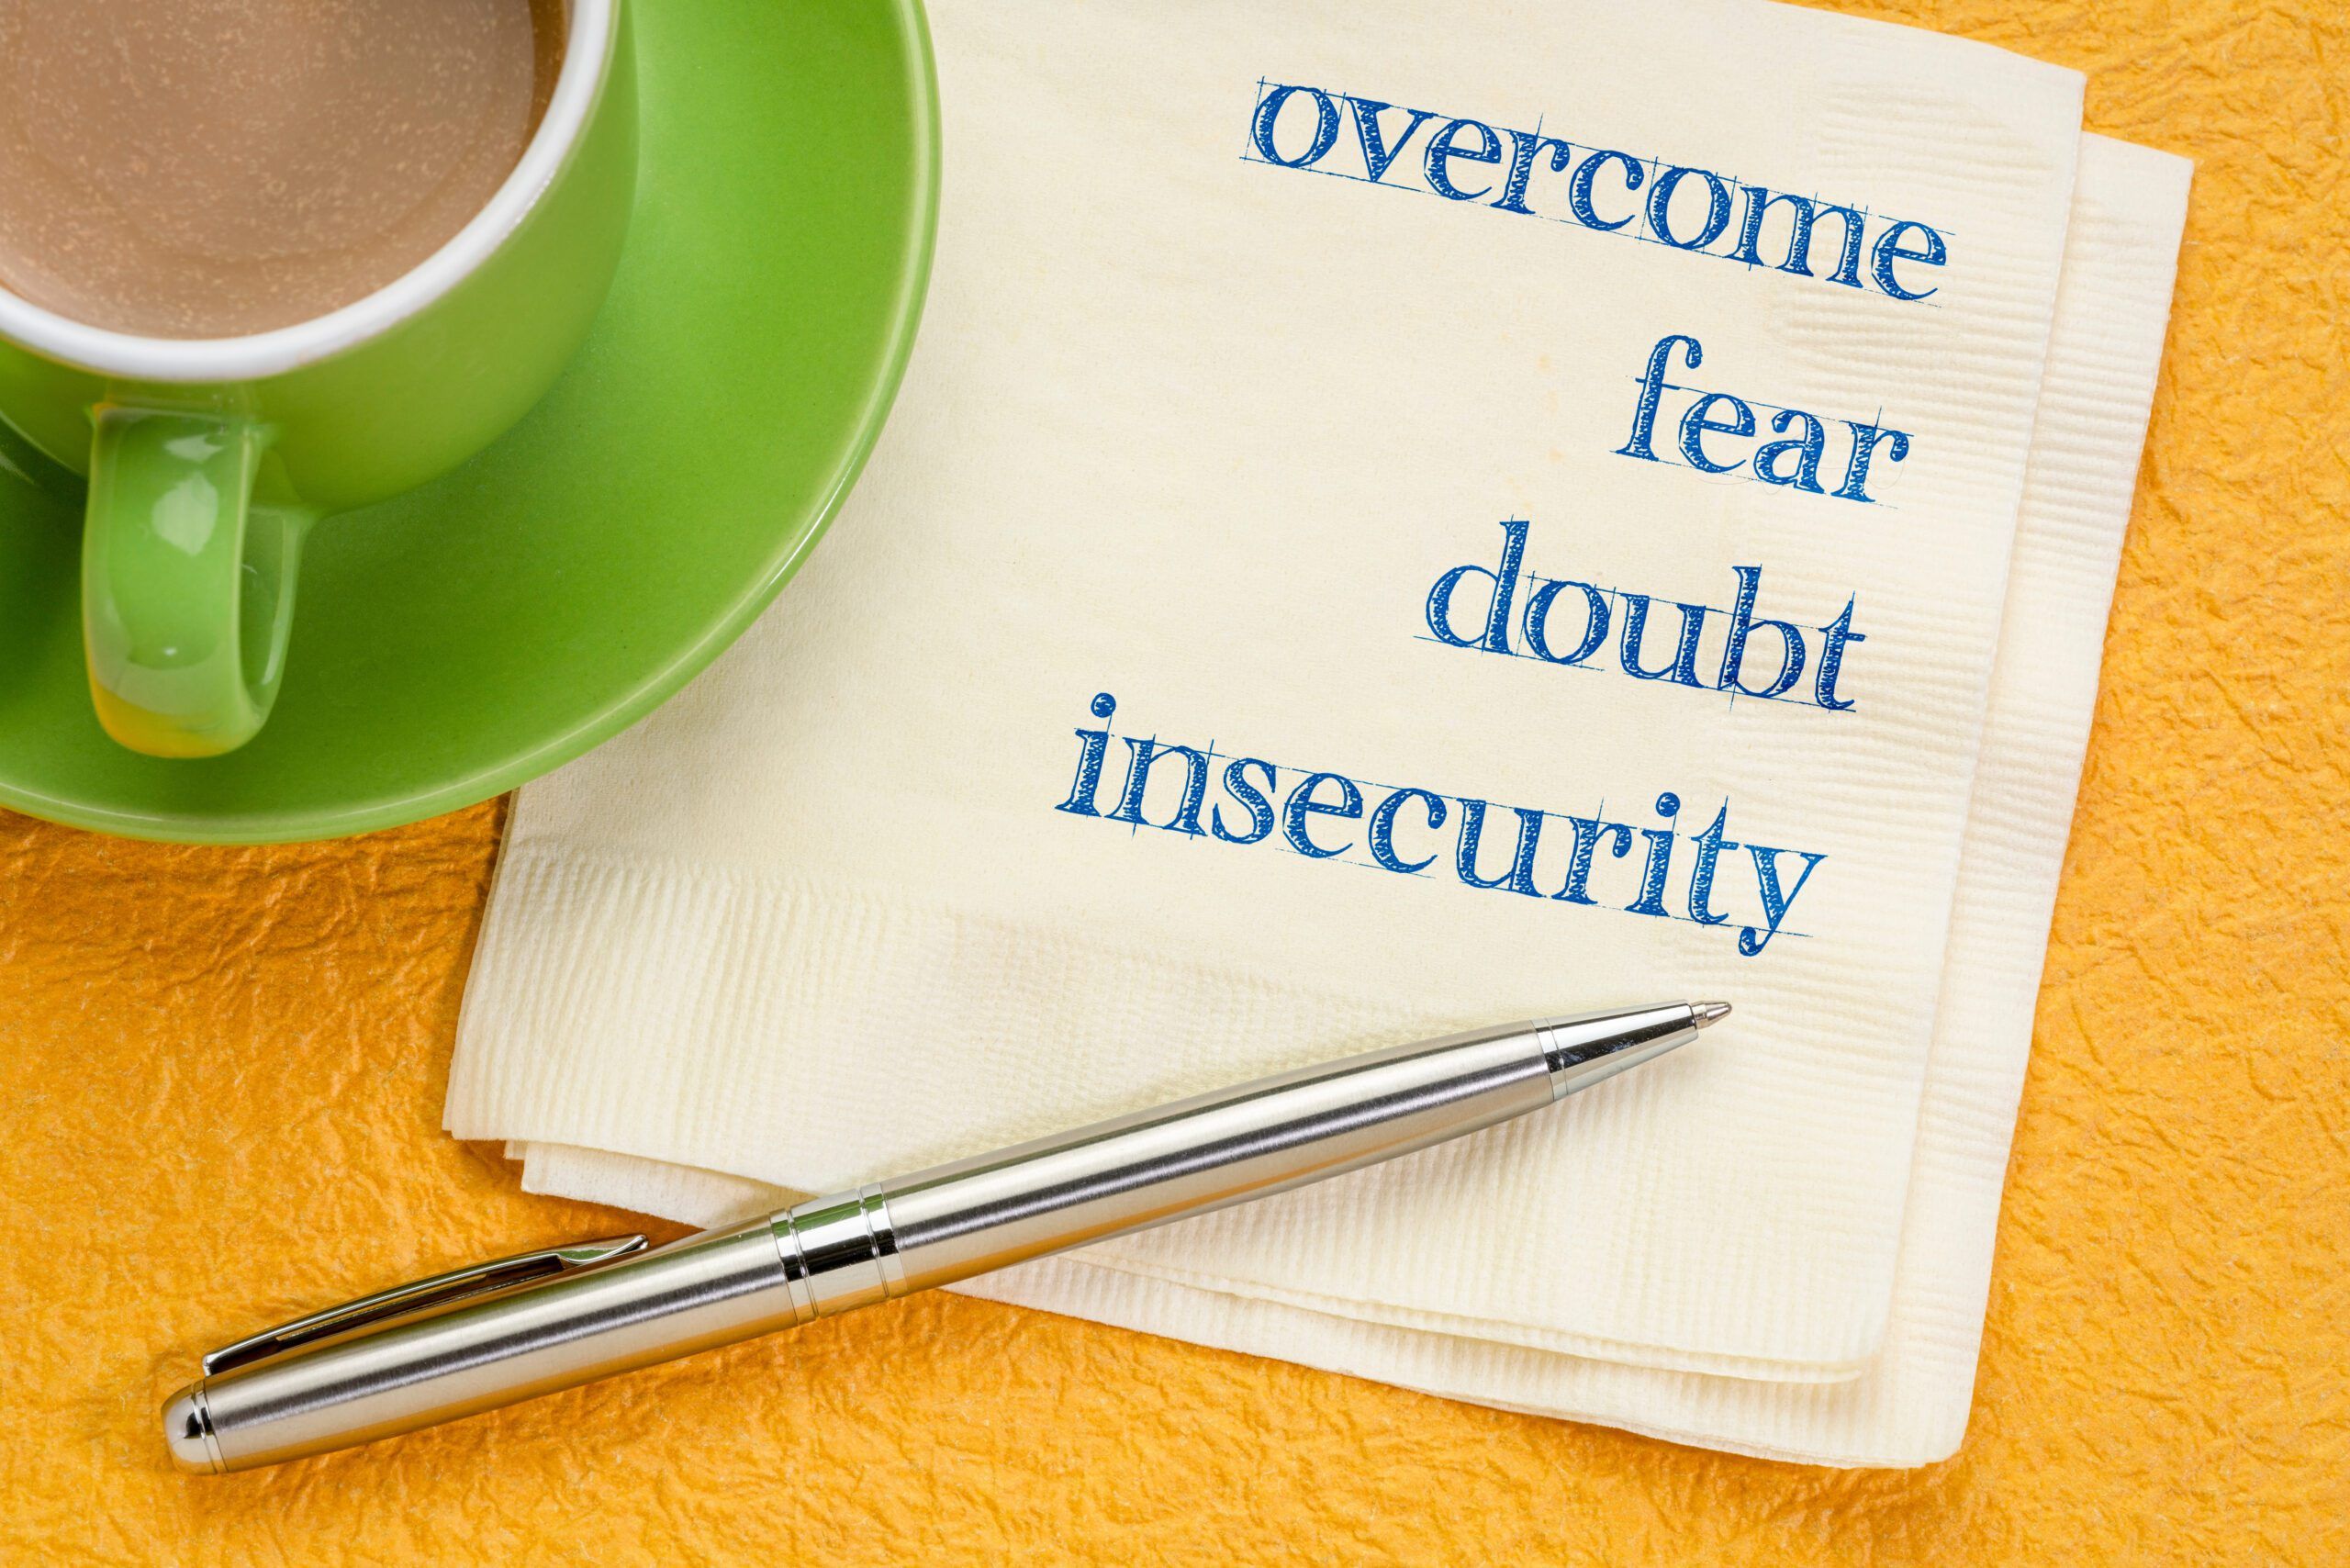 overcome fear, doubt, insecurity - handwriting on a napkin with a cup of coffee